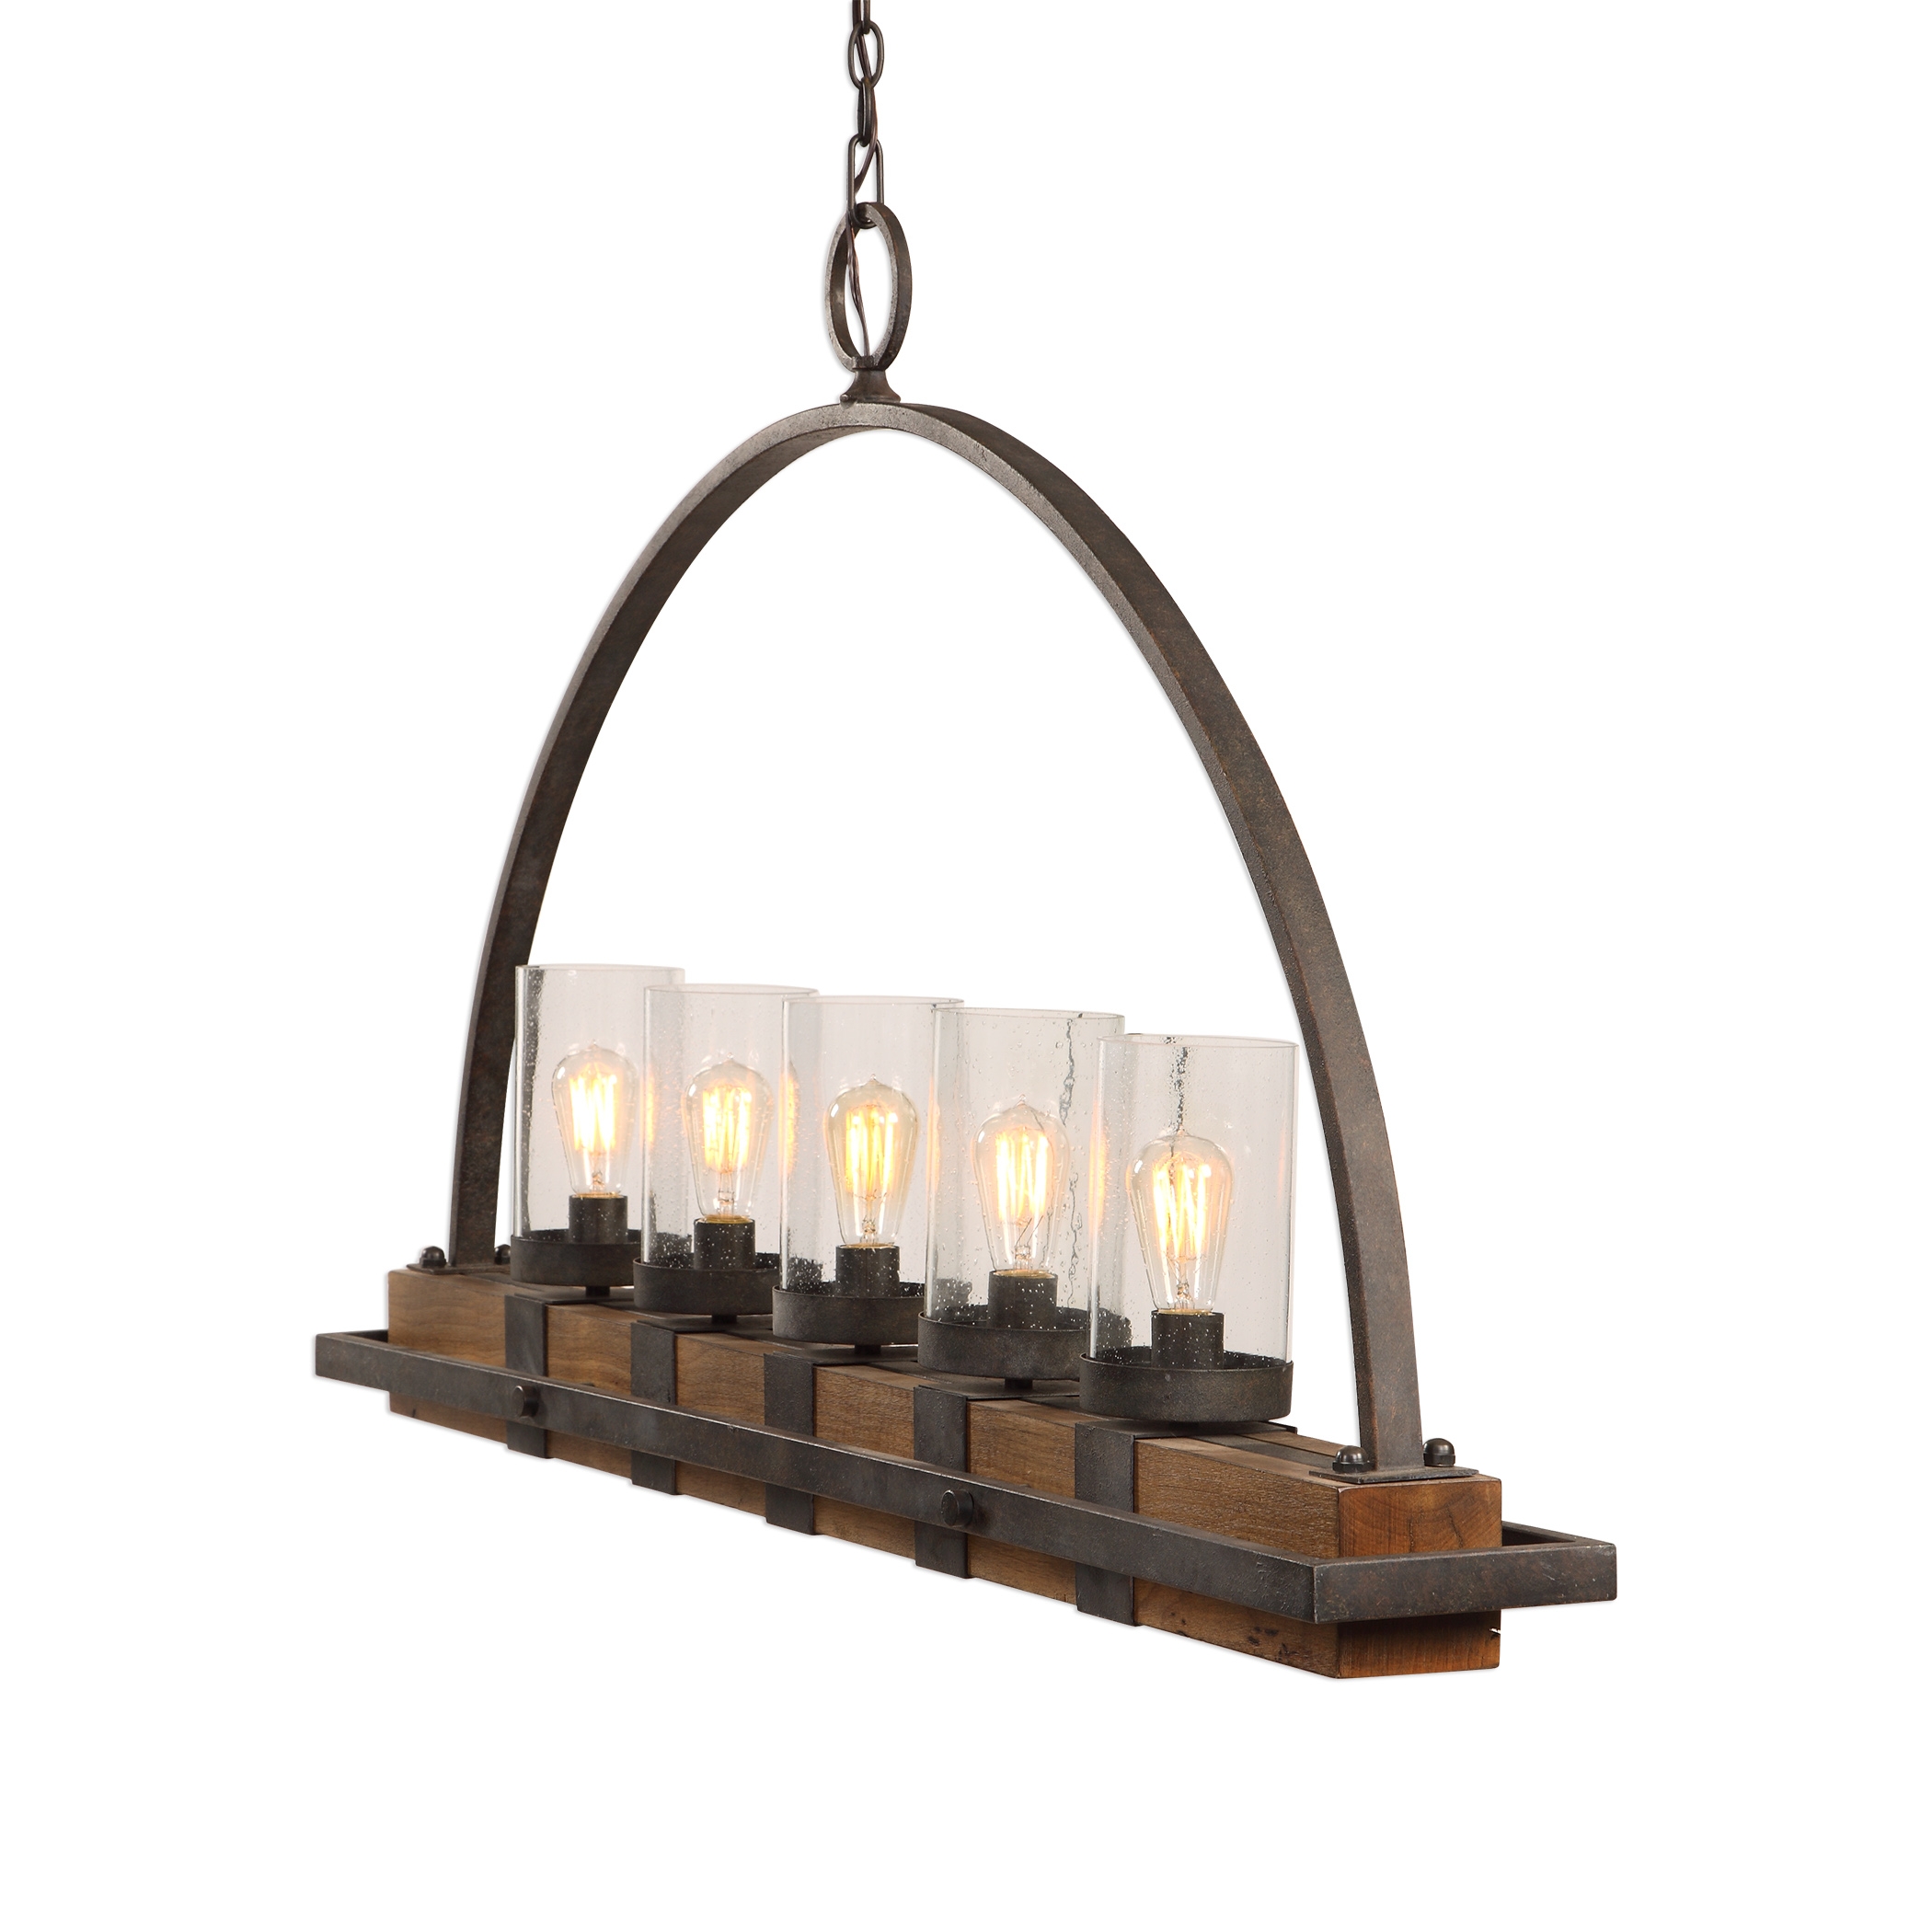 Atwood Rustic Linear Chandelier, 5 Light - Image 5